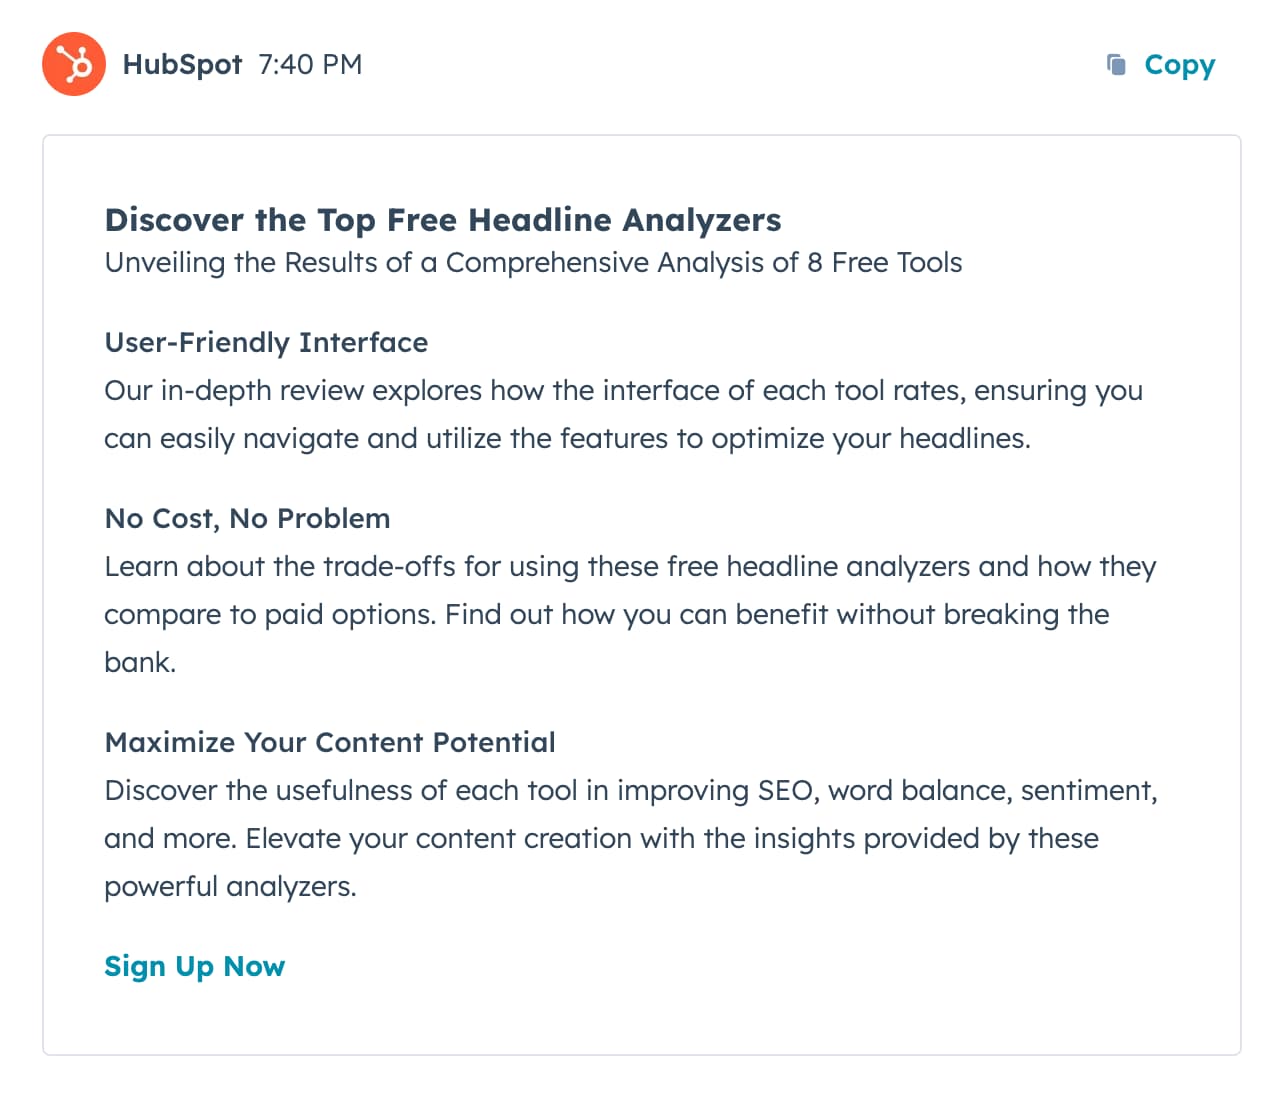 HubSpot’s free AI headline generator suggests “Discover the Top Free Headline Analyzers” as a title for this post.